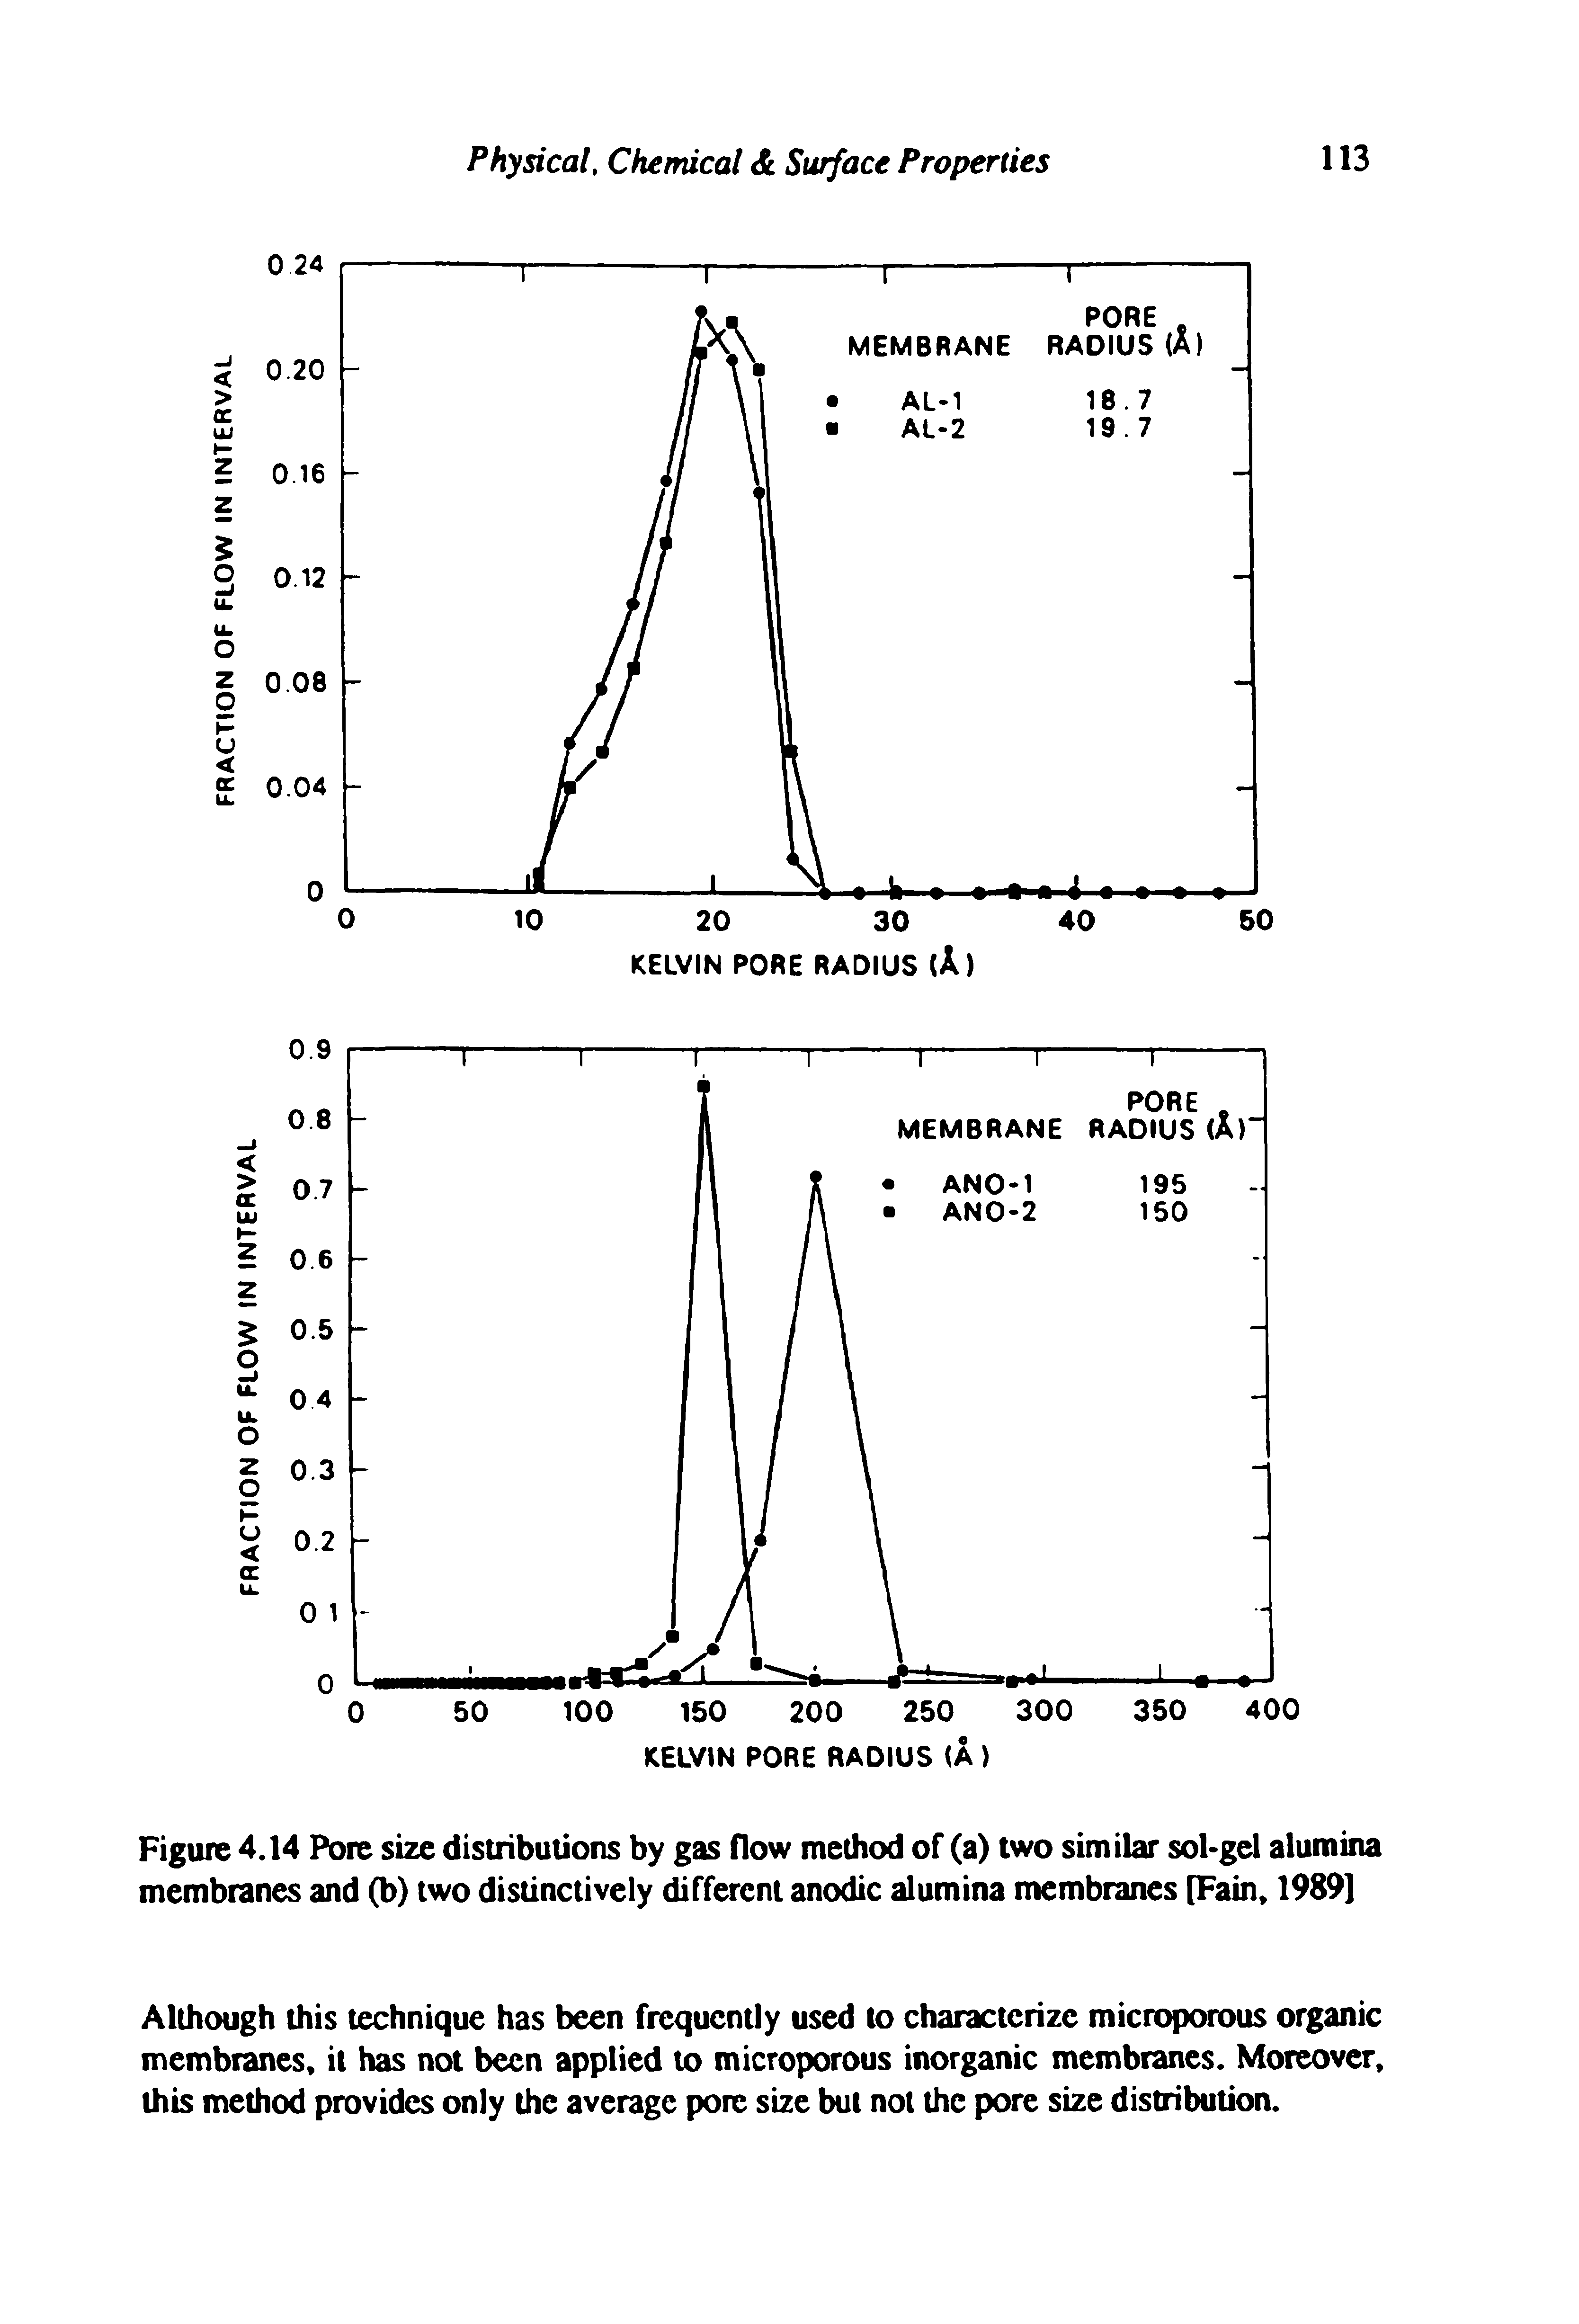 Figure 4.14 Pore size distributions by gas flow method of (a) two similar sol-gel alumina membranes and (b) two distinctively different anodic alumina membranes [Fain 1989]...